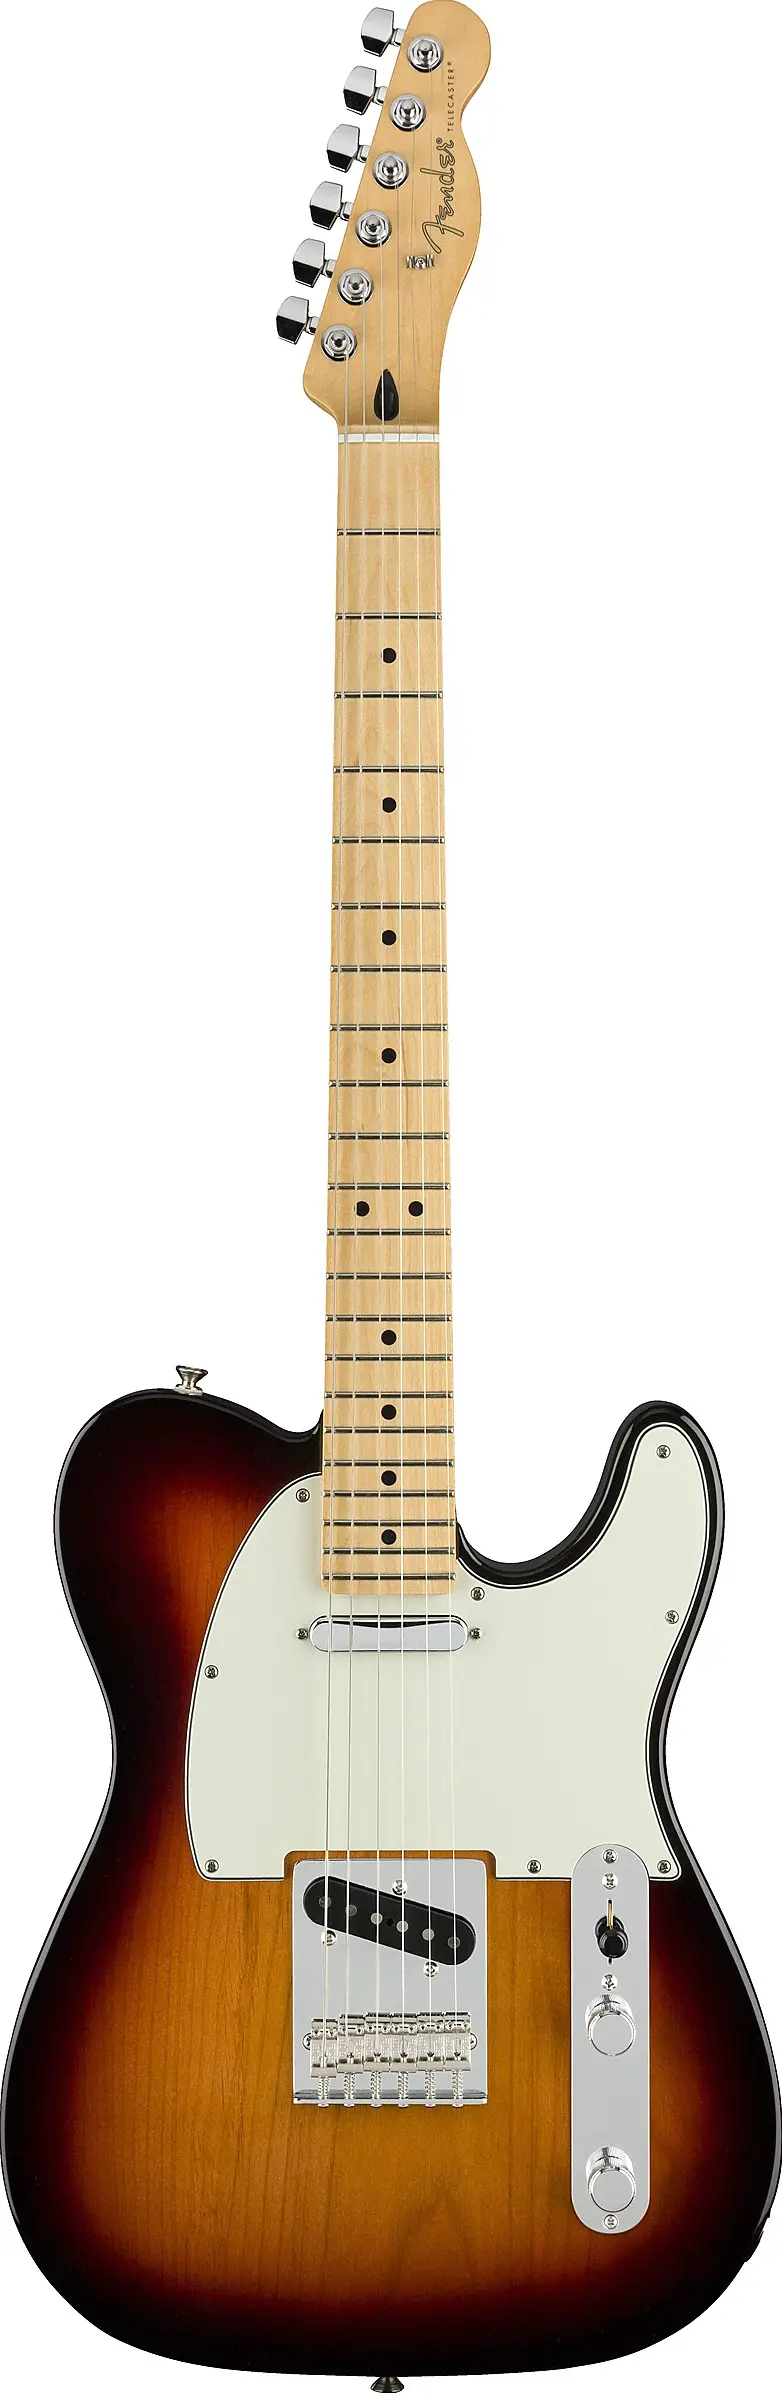 Player Telecaster� by Fender